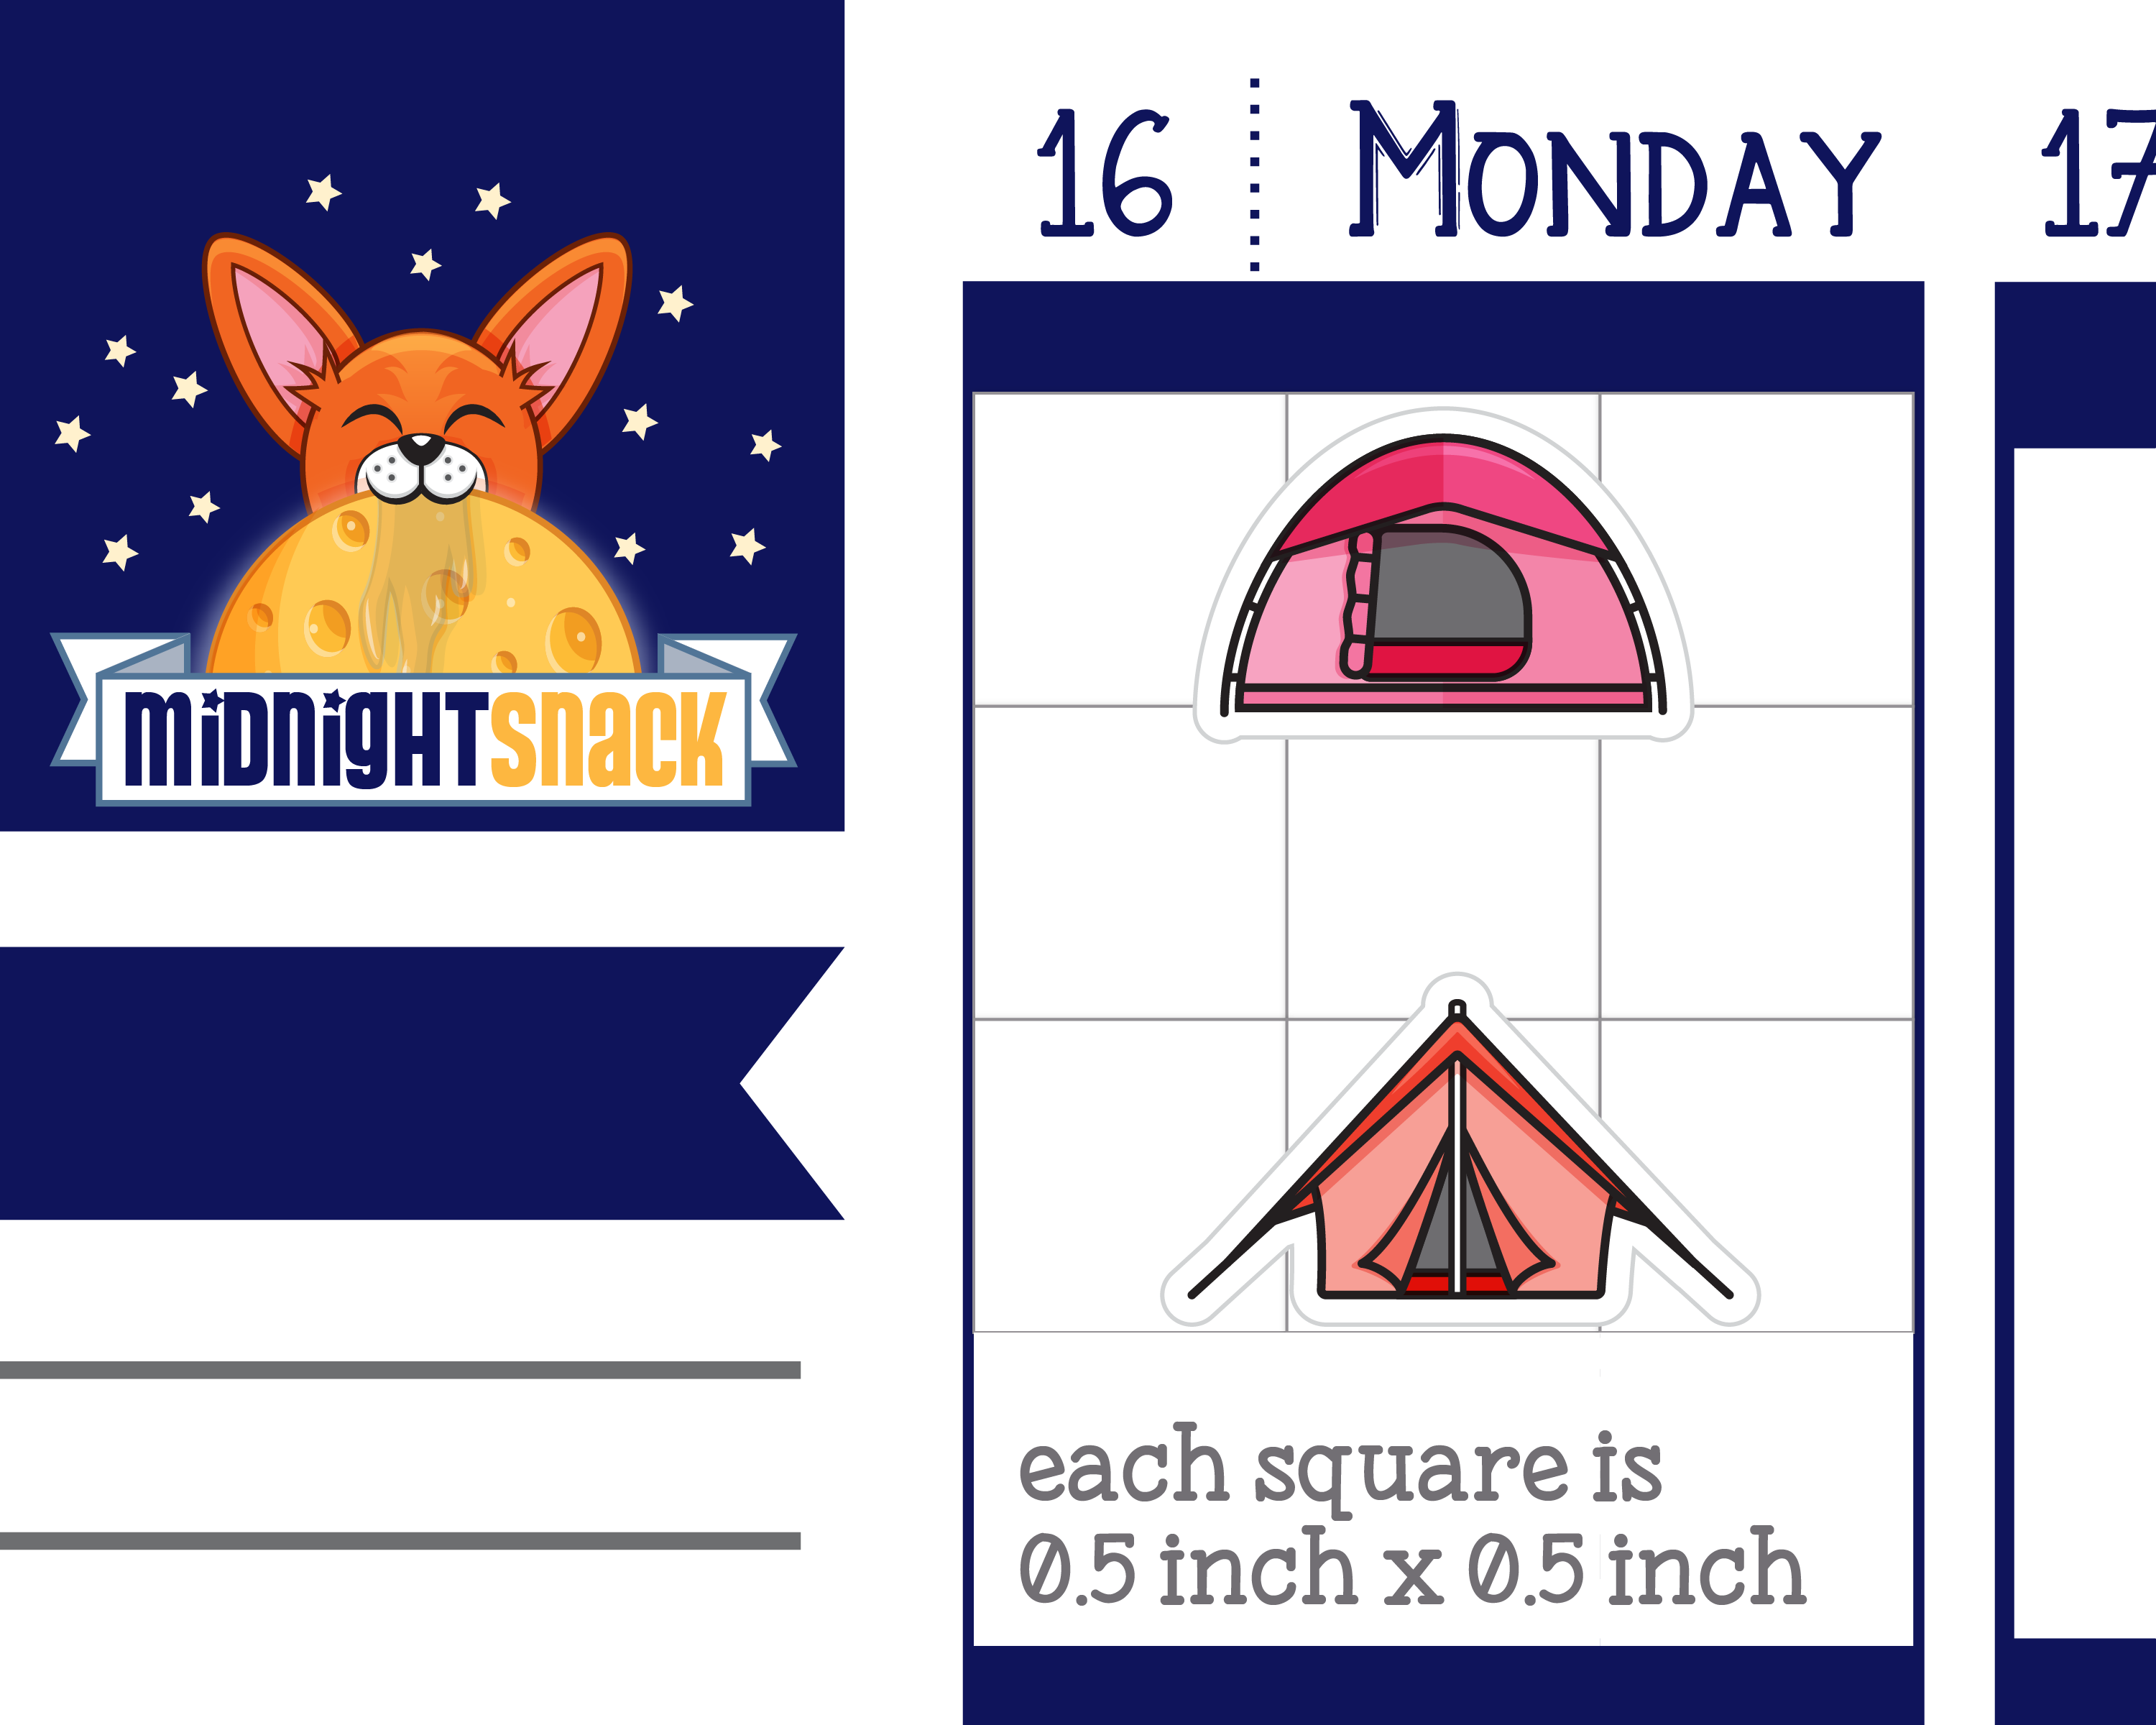 Tent Icon: Camping Trip  Planner Stickers Midnight Snack Planner